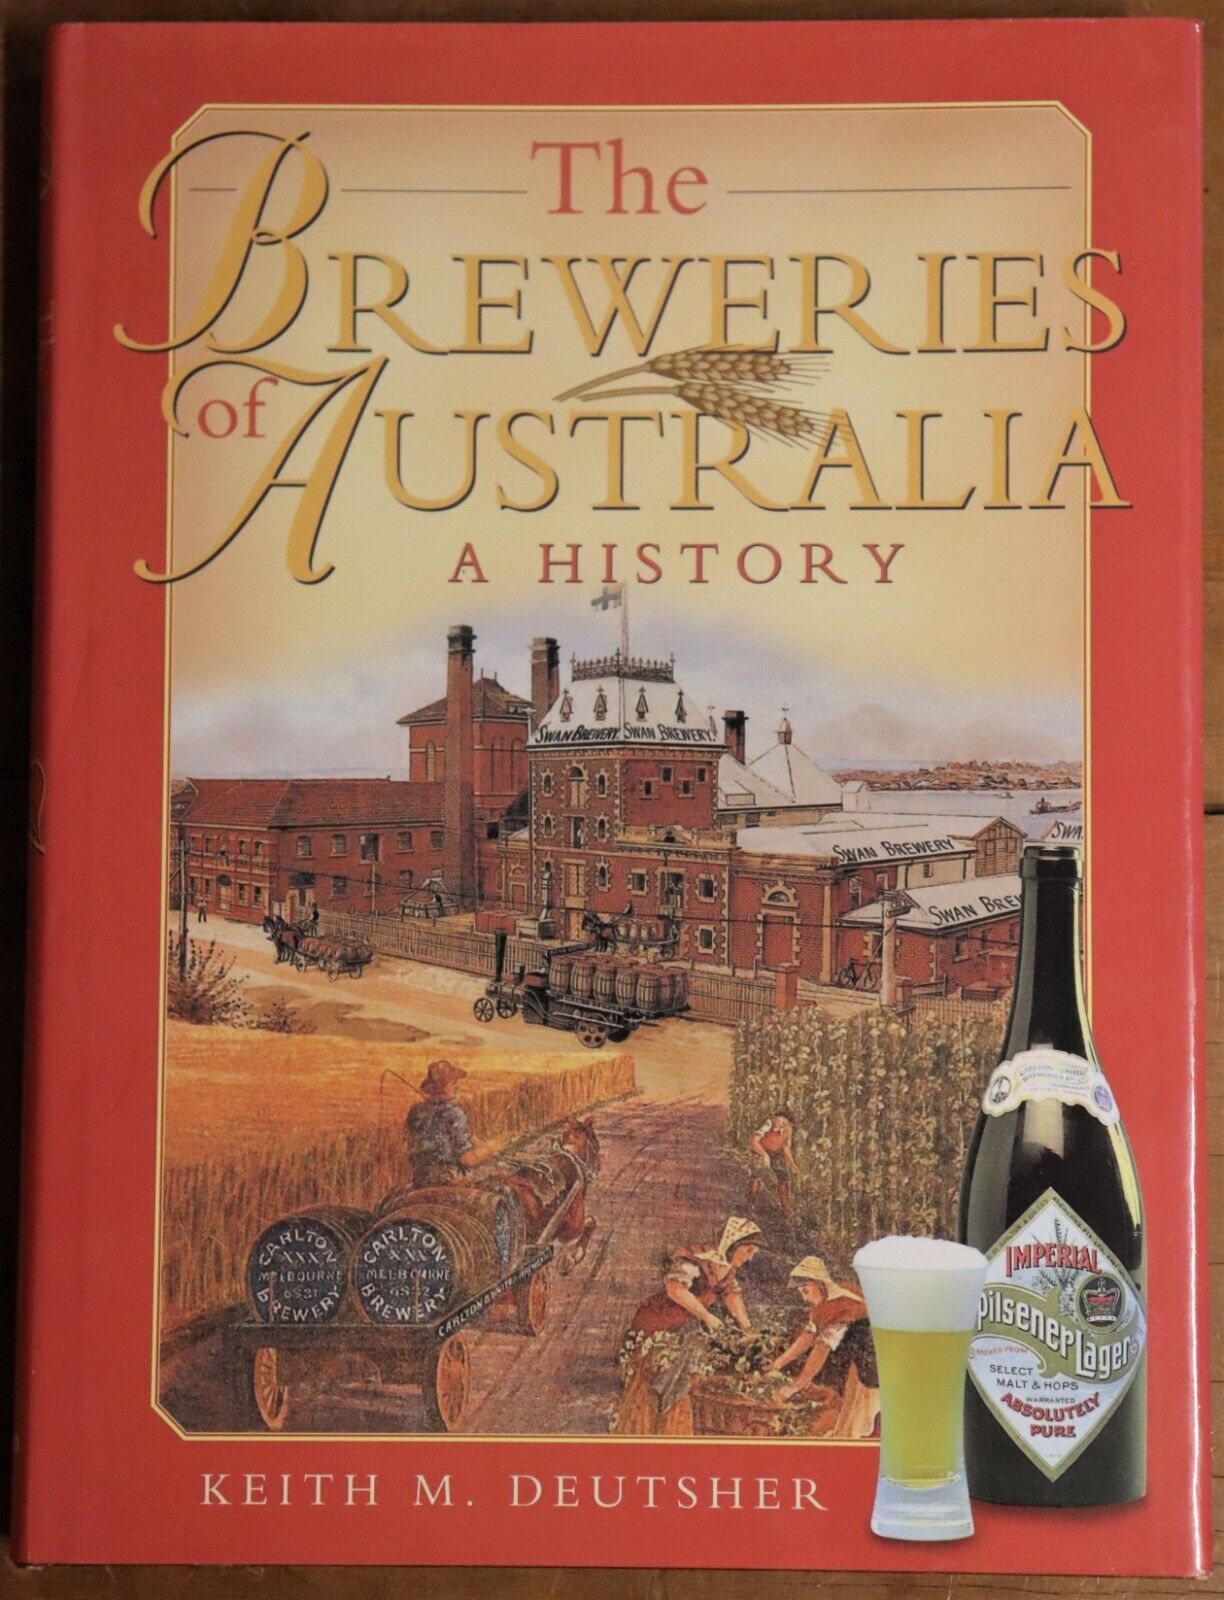 The Breweries of Australia by Keith Deutsher - 1999 - First Edition